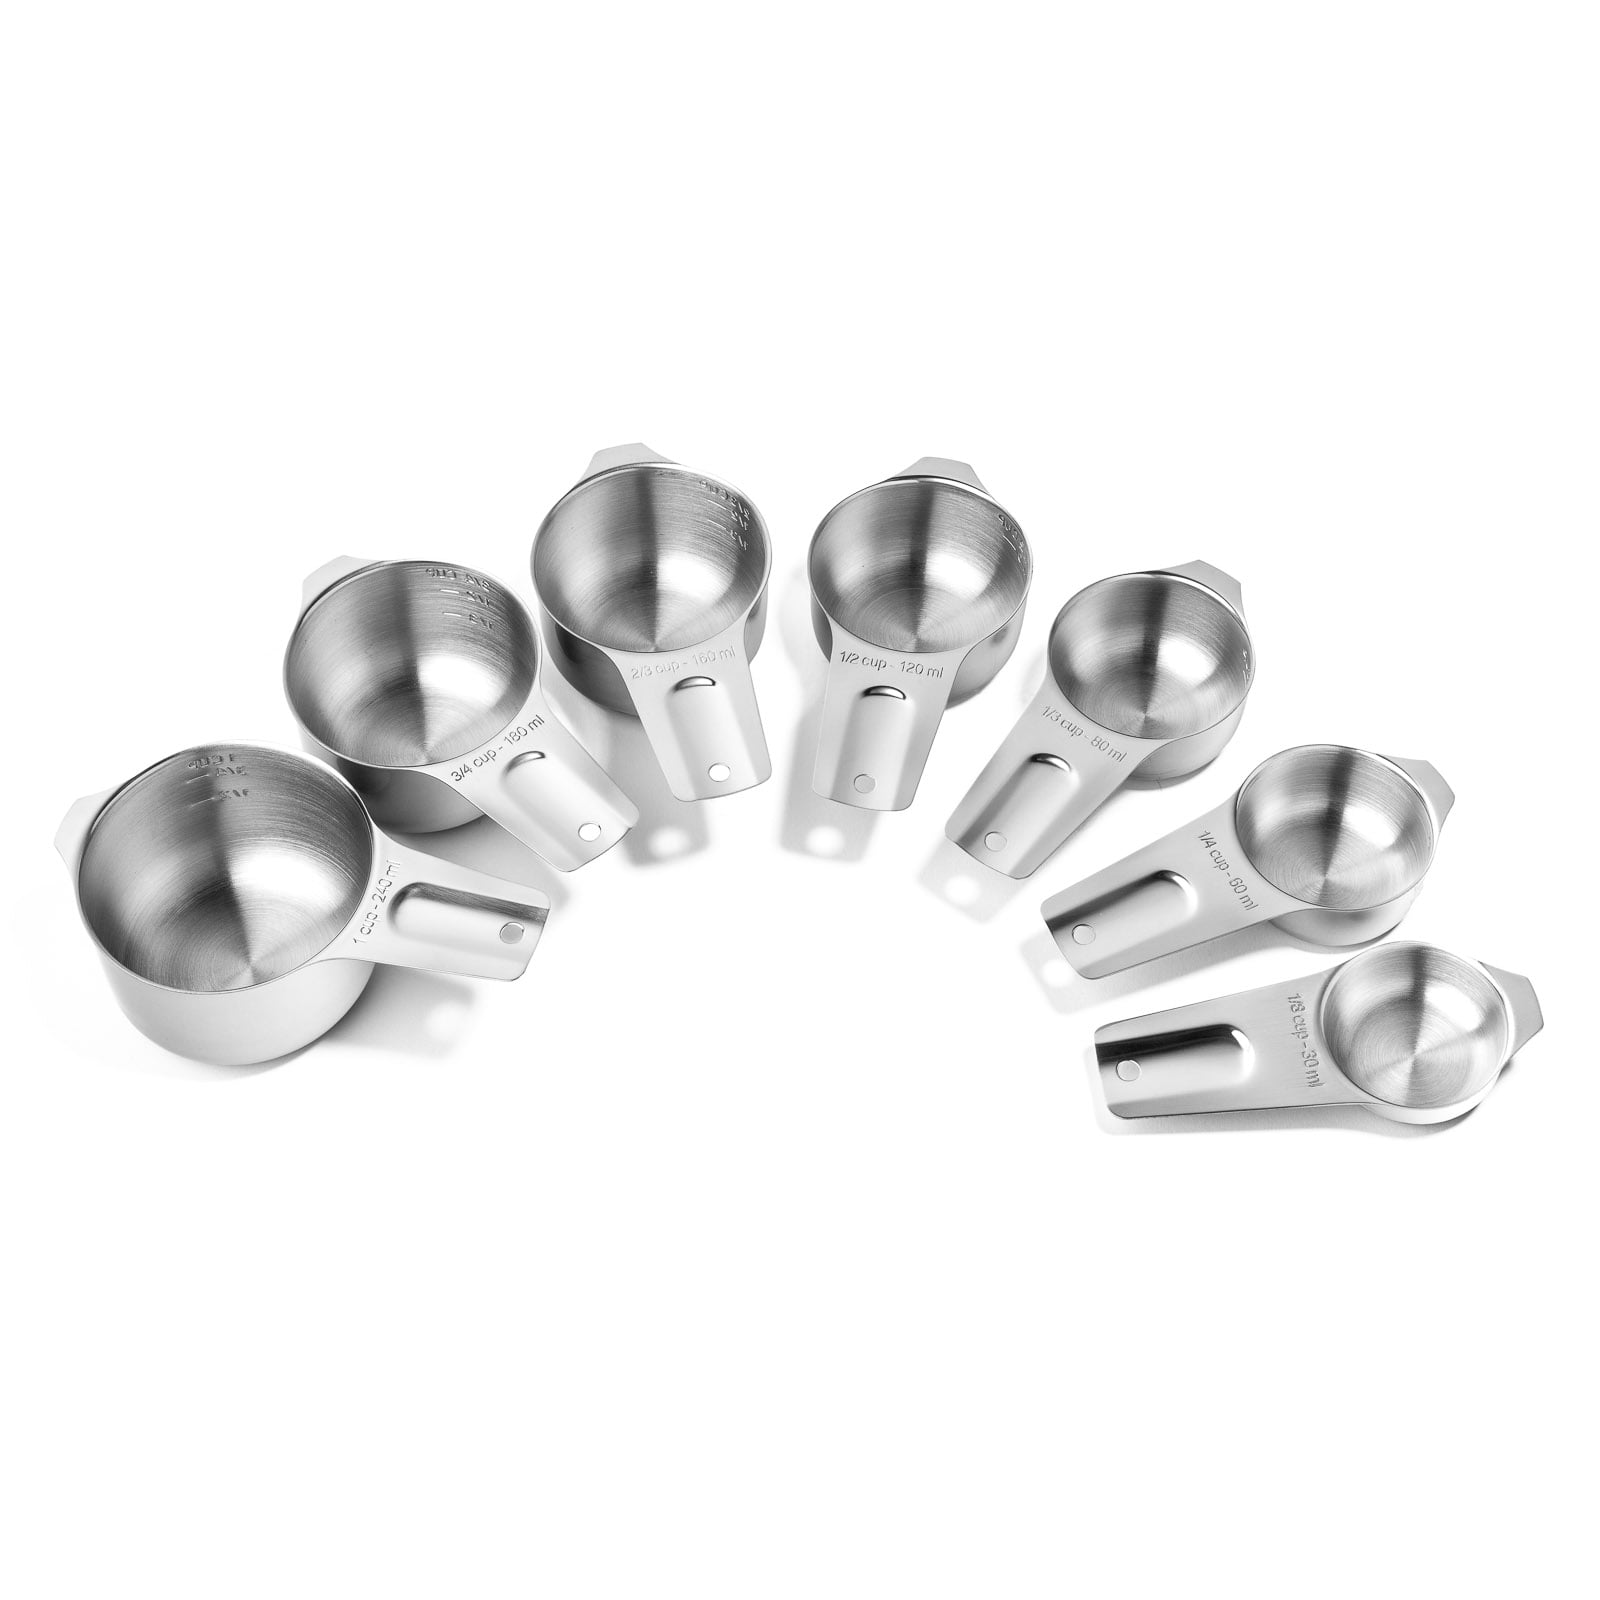 4-Piece Measuring Cups Set, (1/4 cup, 1/3 cup, 1/2 cup and 1 cup) Stainless  Steel Baking Cups for Dry and Liquid Ingredients by Tezzorio